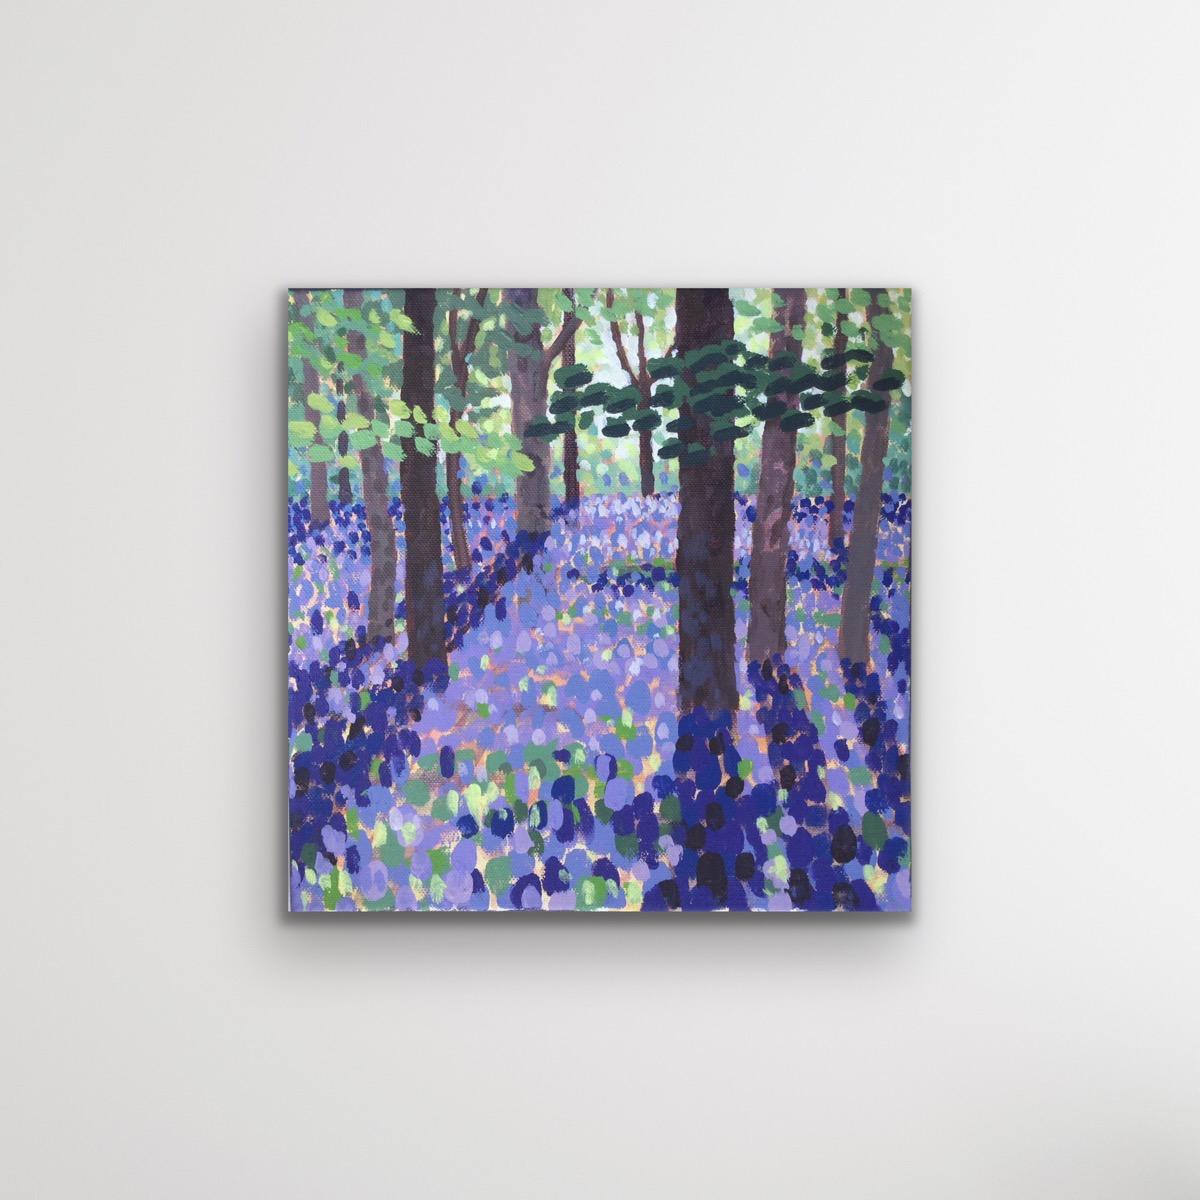 Bluebell woods 1 is an original painting by Rosemary Farrer. At this time of year I head for the woods to paint the bluebells. The colours are very hard to capture, not quite purple, not quite blue, photographs don't quite do them justice. This is